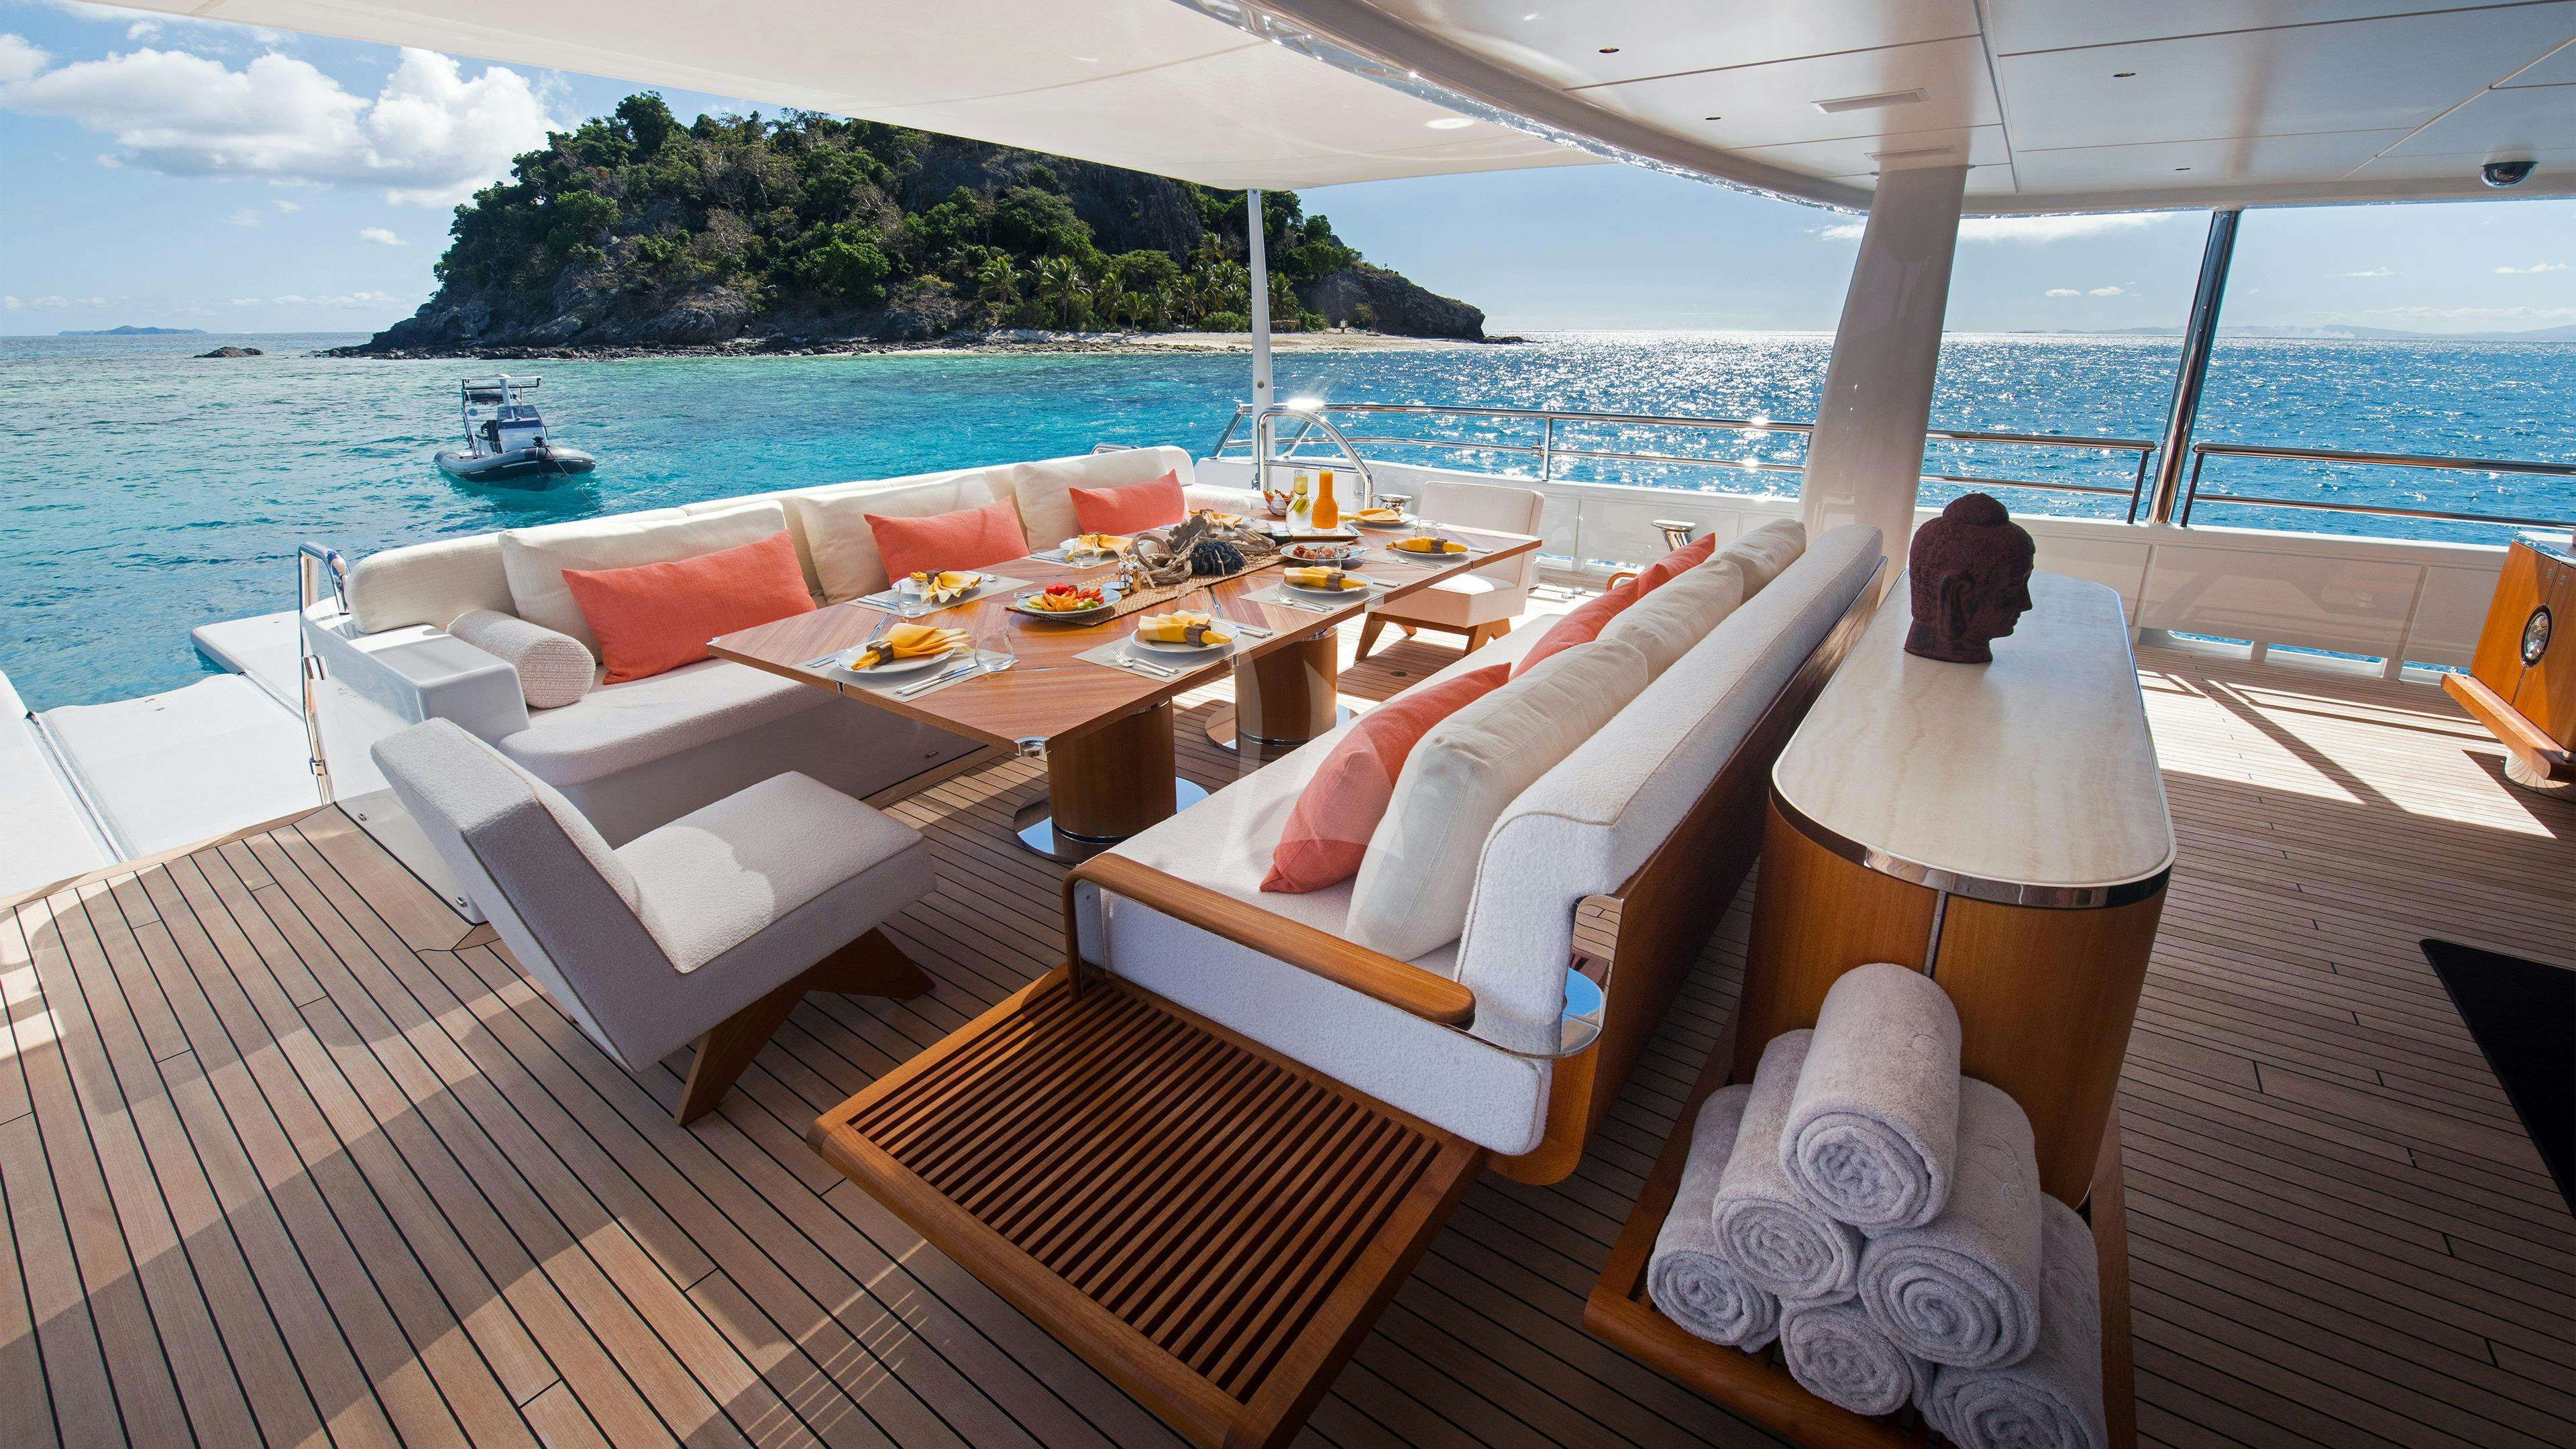 DRIFTWOOD Yacht for Charter, 180' 5 (55m) 2017 5 Cabins Amels